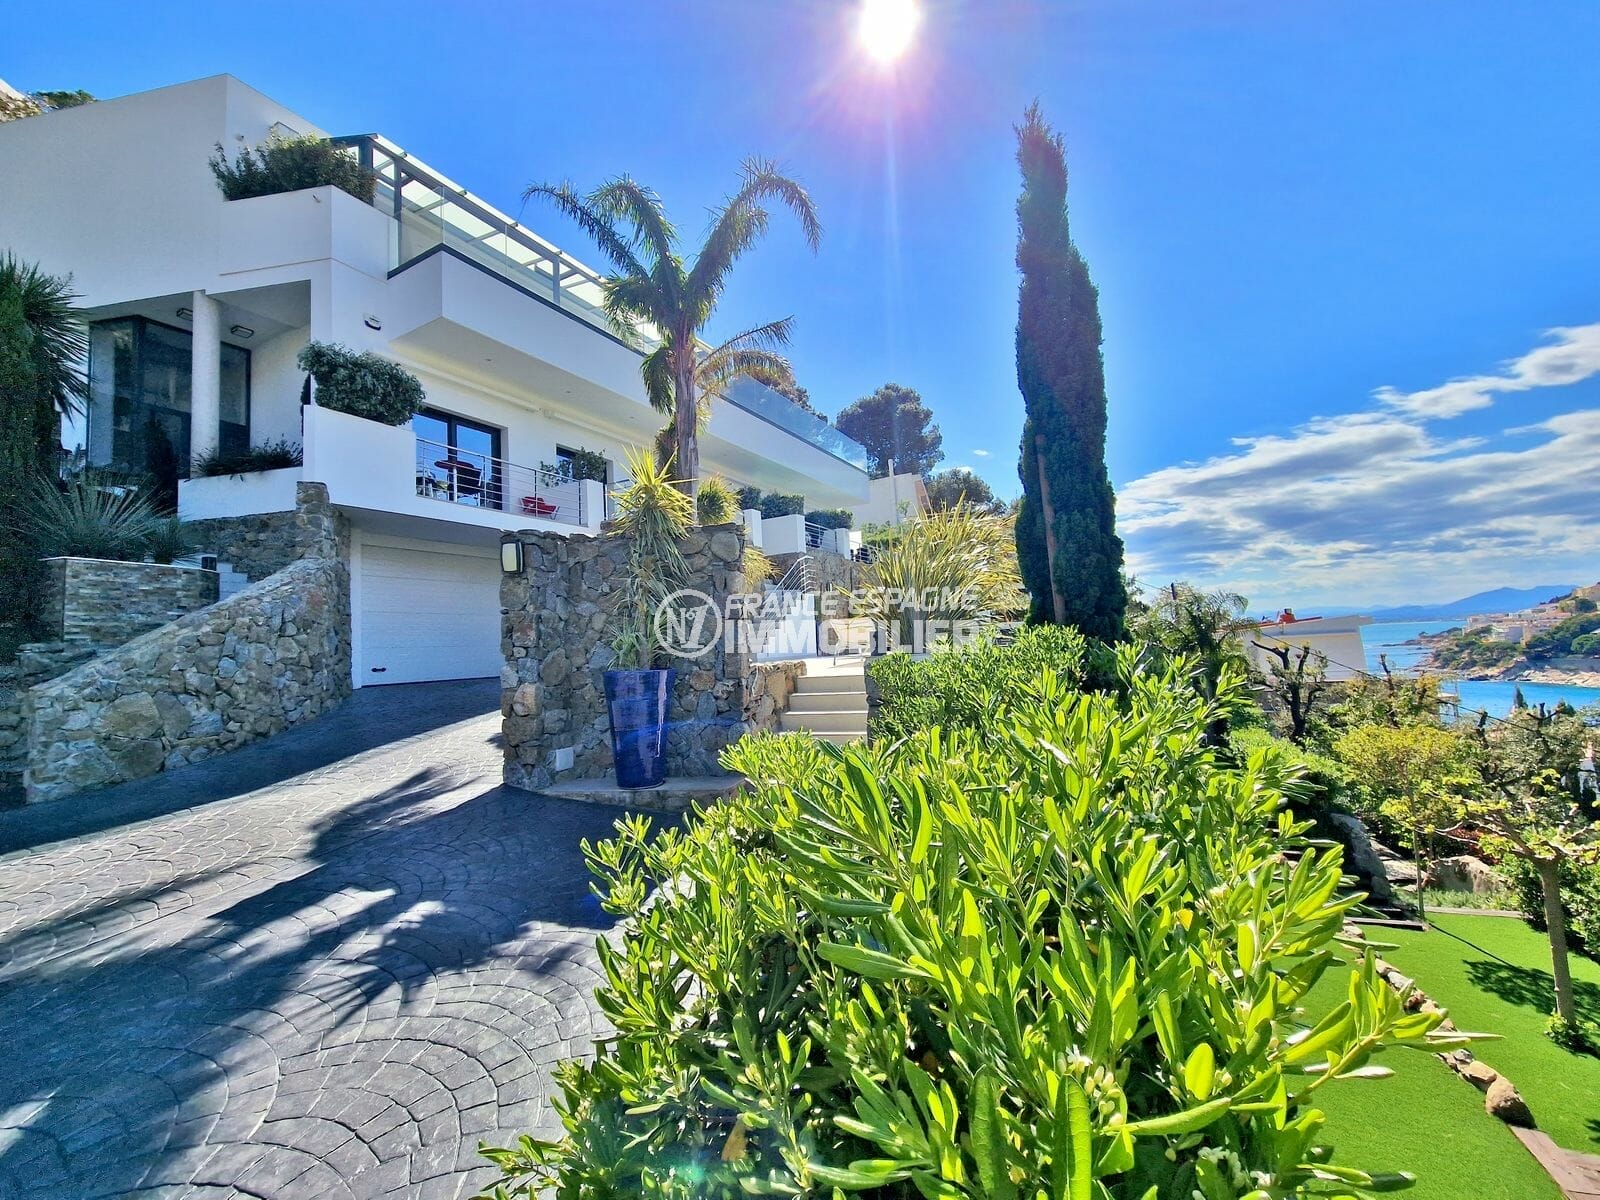 Roses - exceptional luxury villa with breathtaking sea views, 200m from the beach